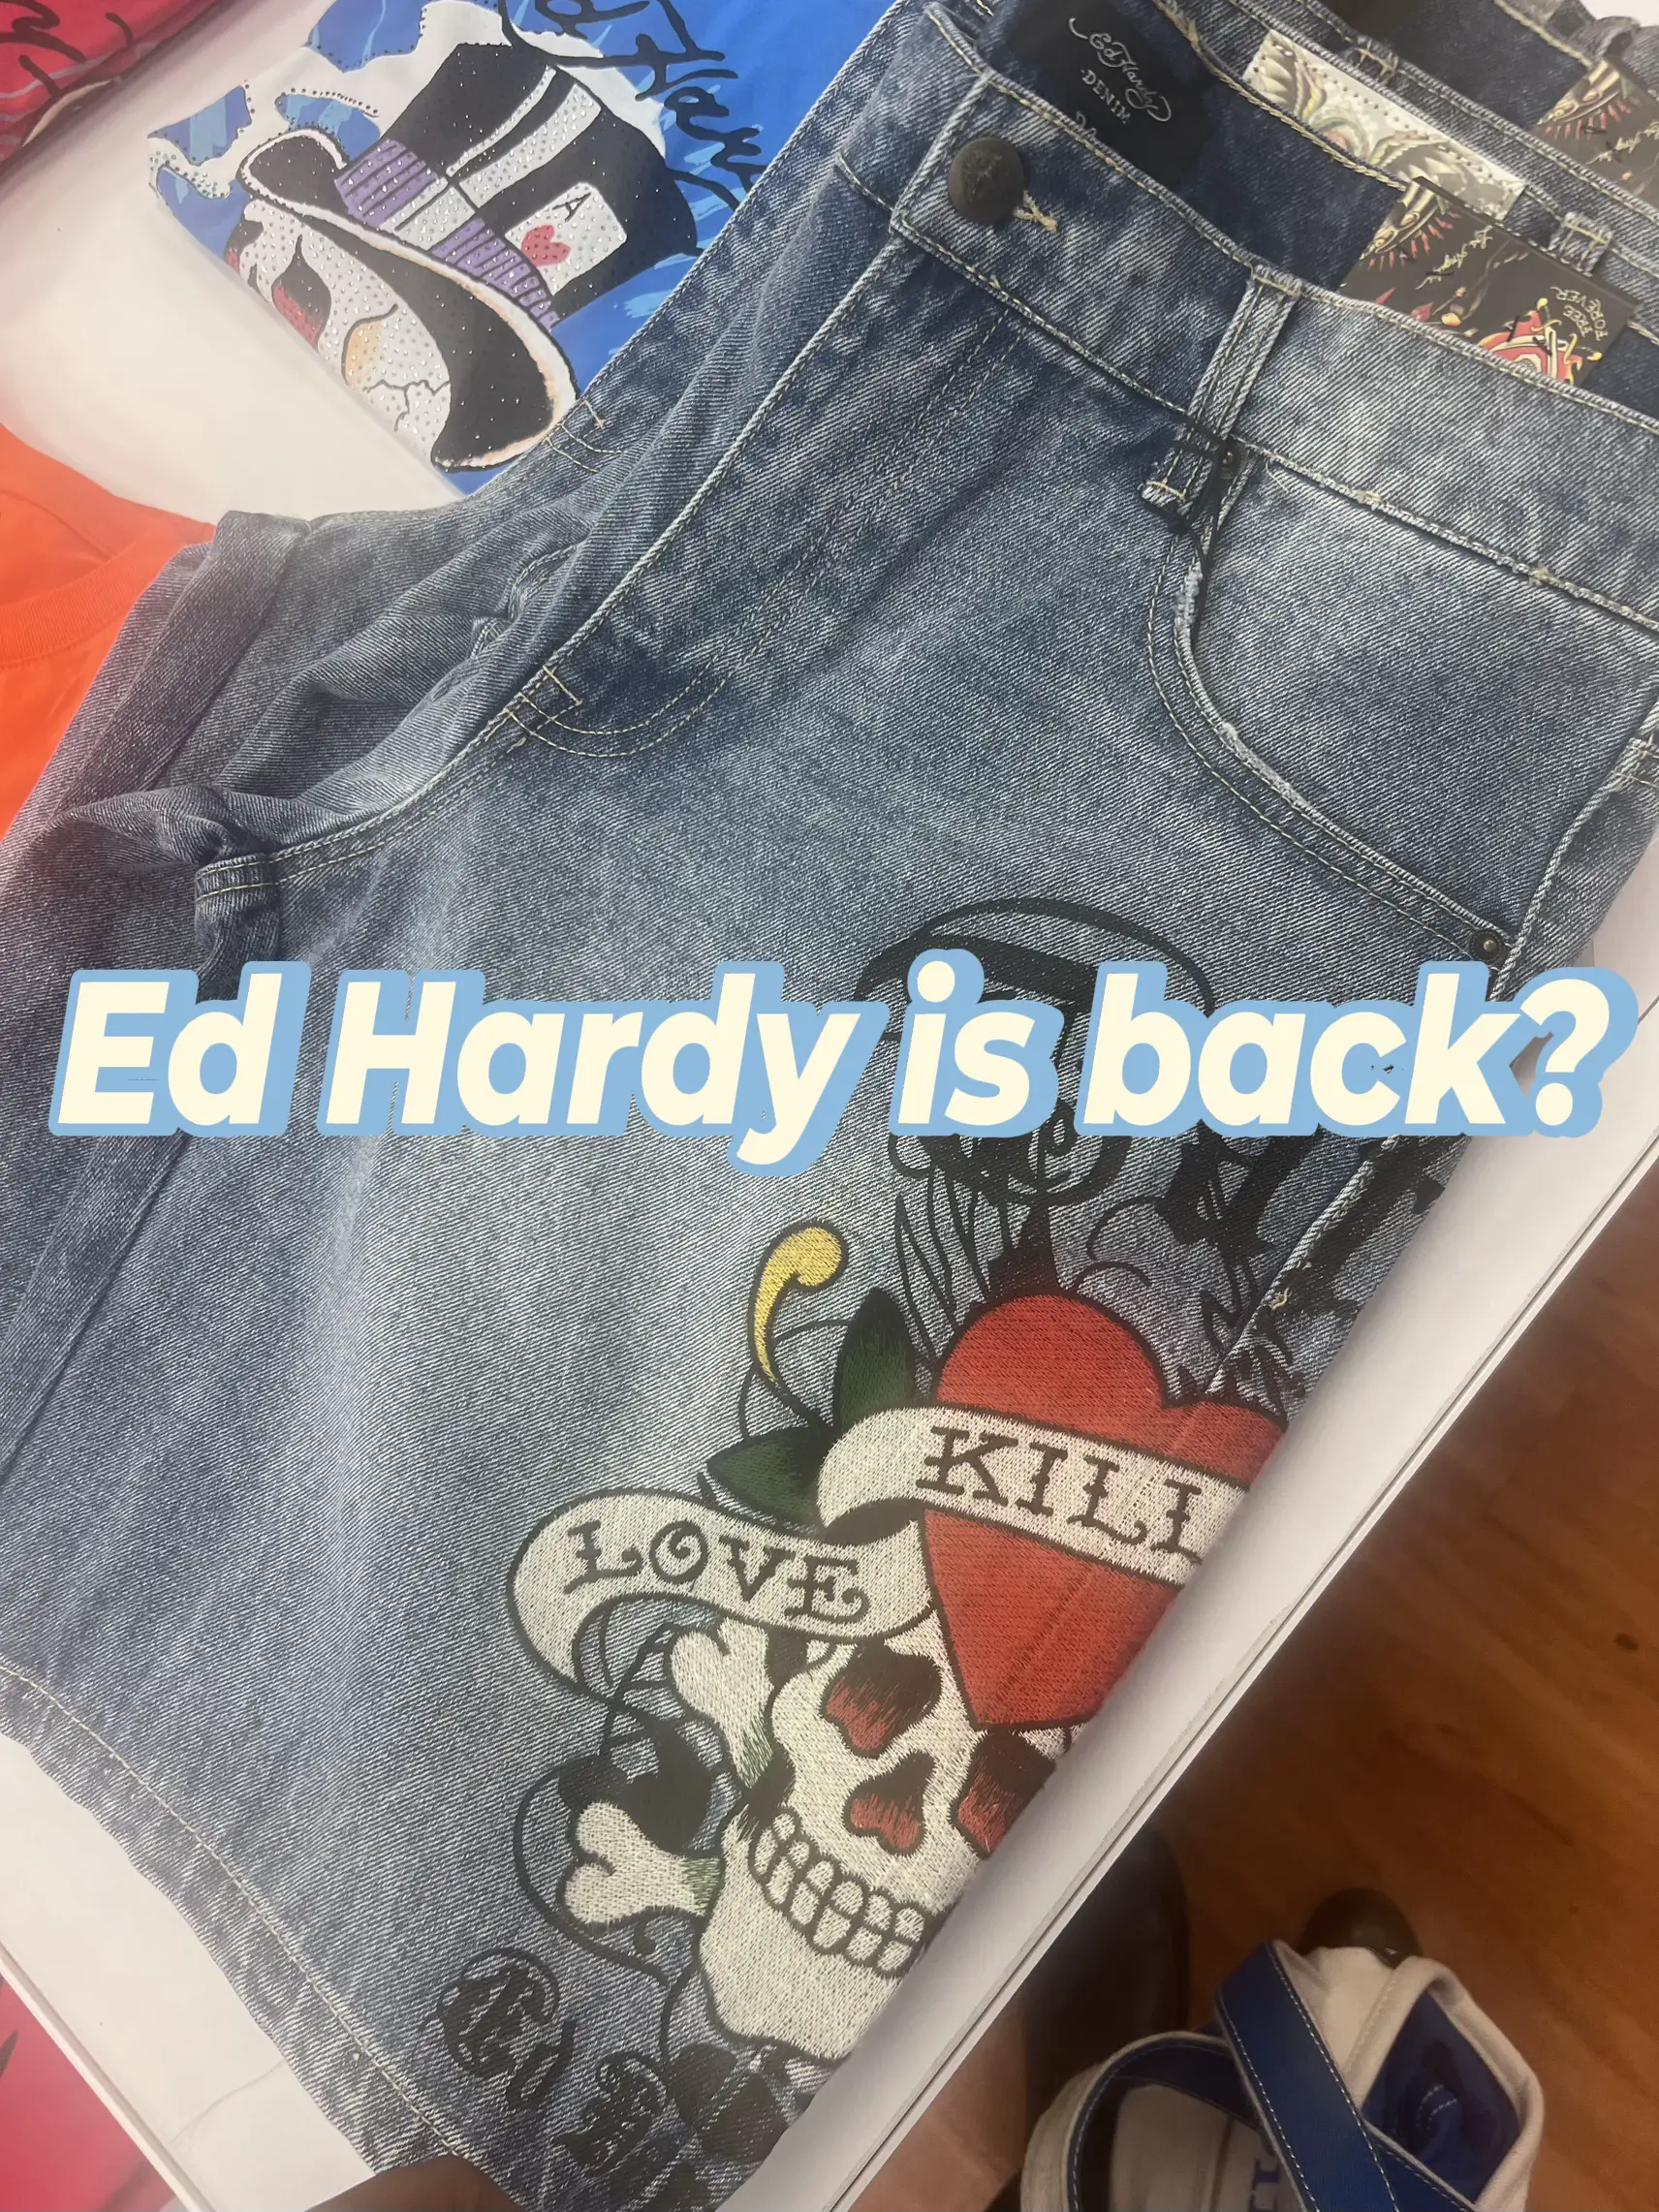 Ed Hardy is back? | Gallery posted by dimmyworldwide | Lemon8